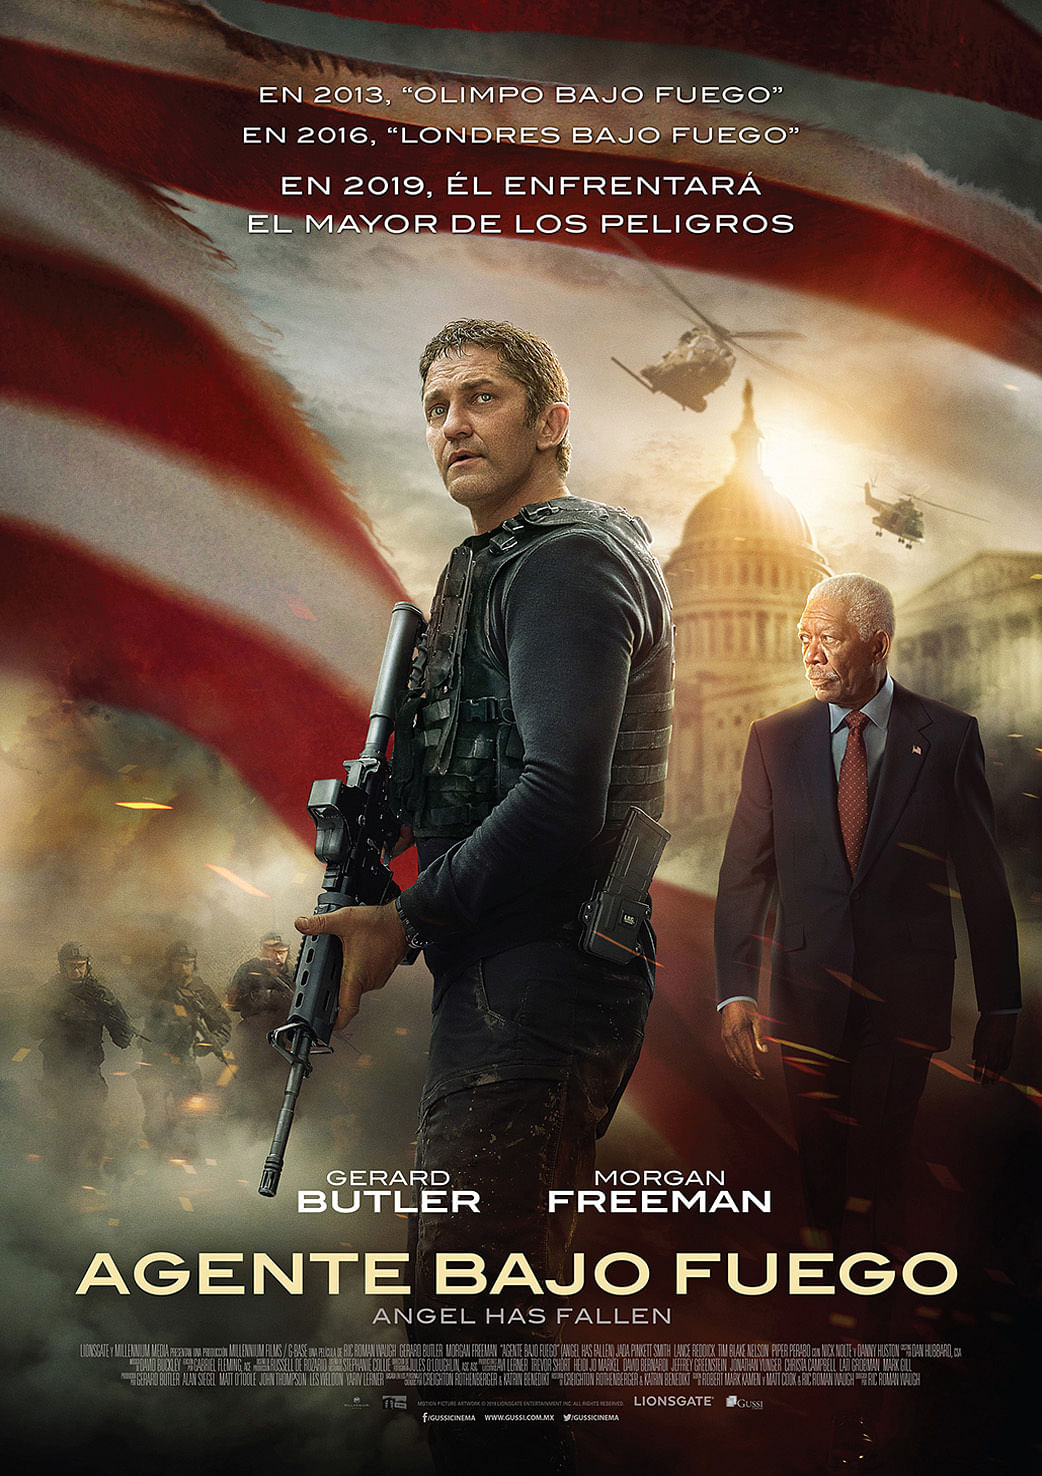 Gerard Butler says 'Angel Has Fallen', 'Den of Thieves' sequels are being developed